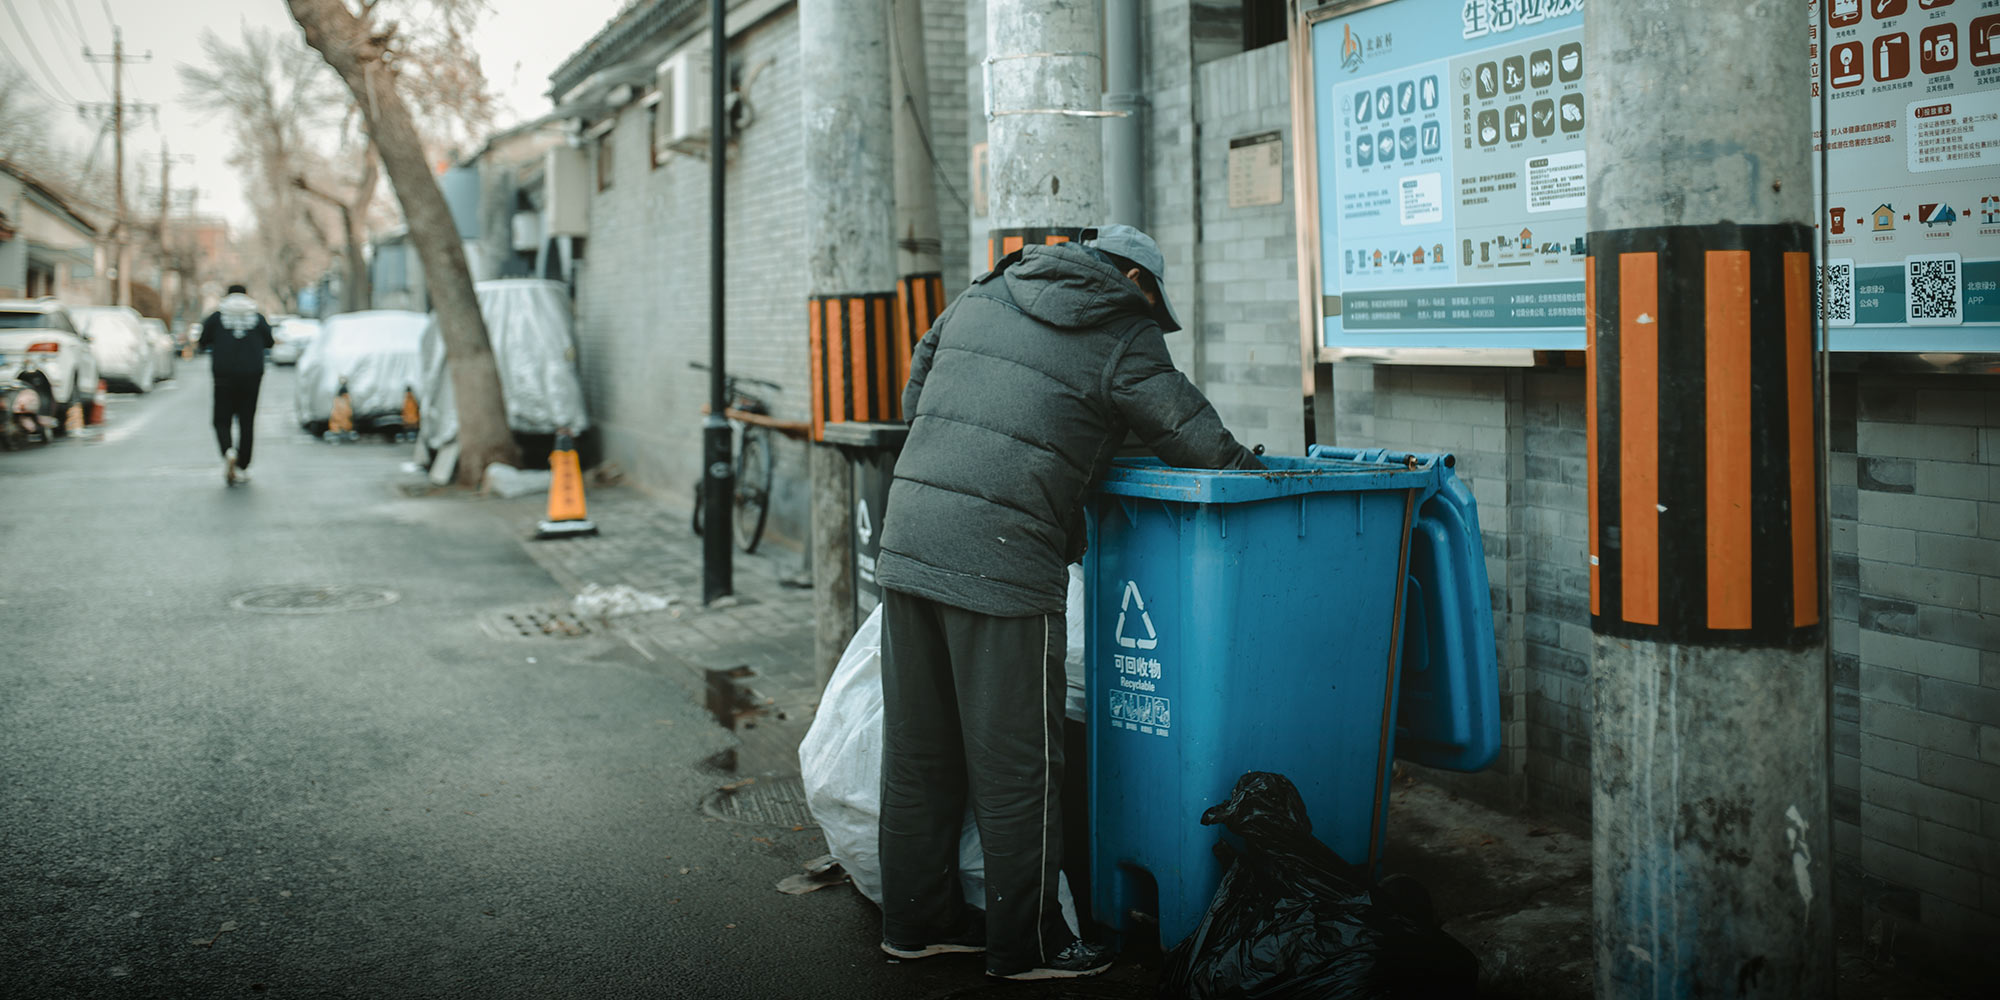 Contemporary China Centre Blog » Garbage Bins Are for Containing People Too